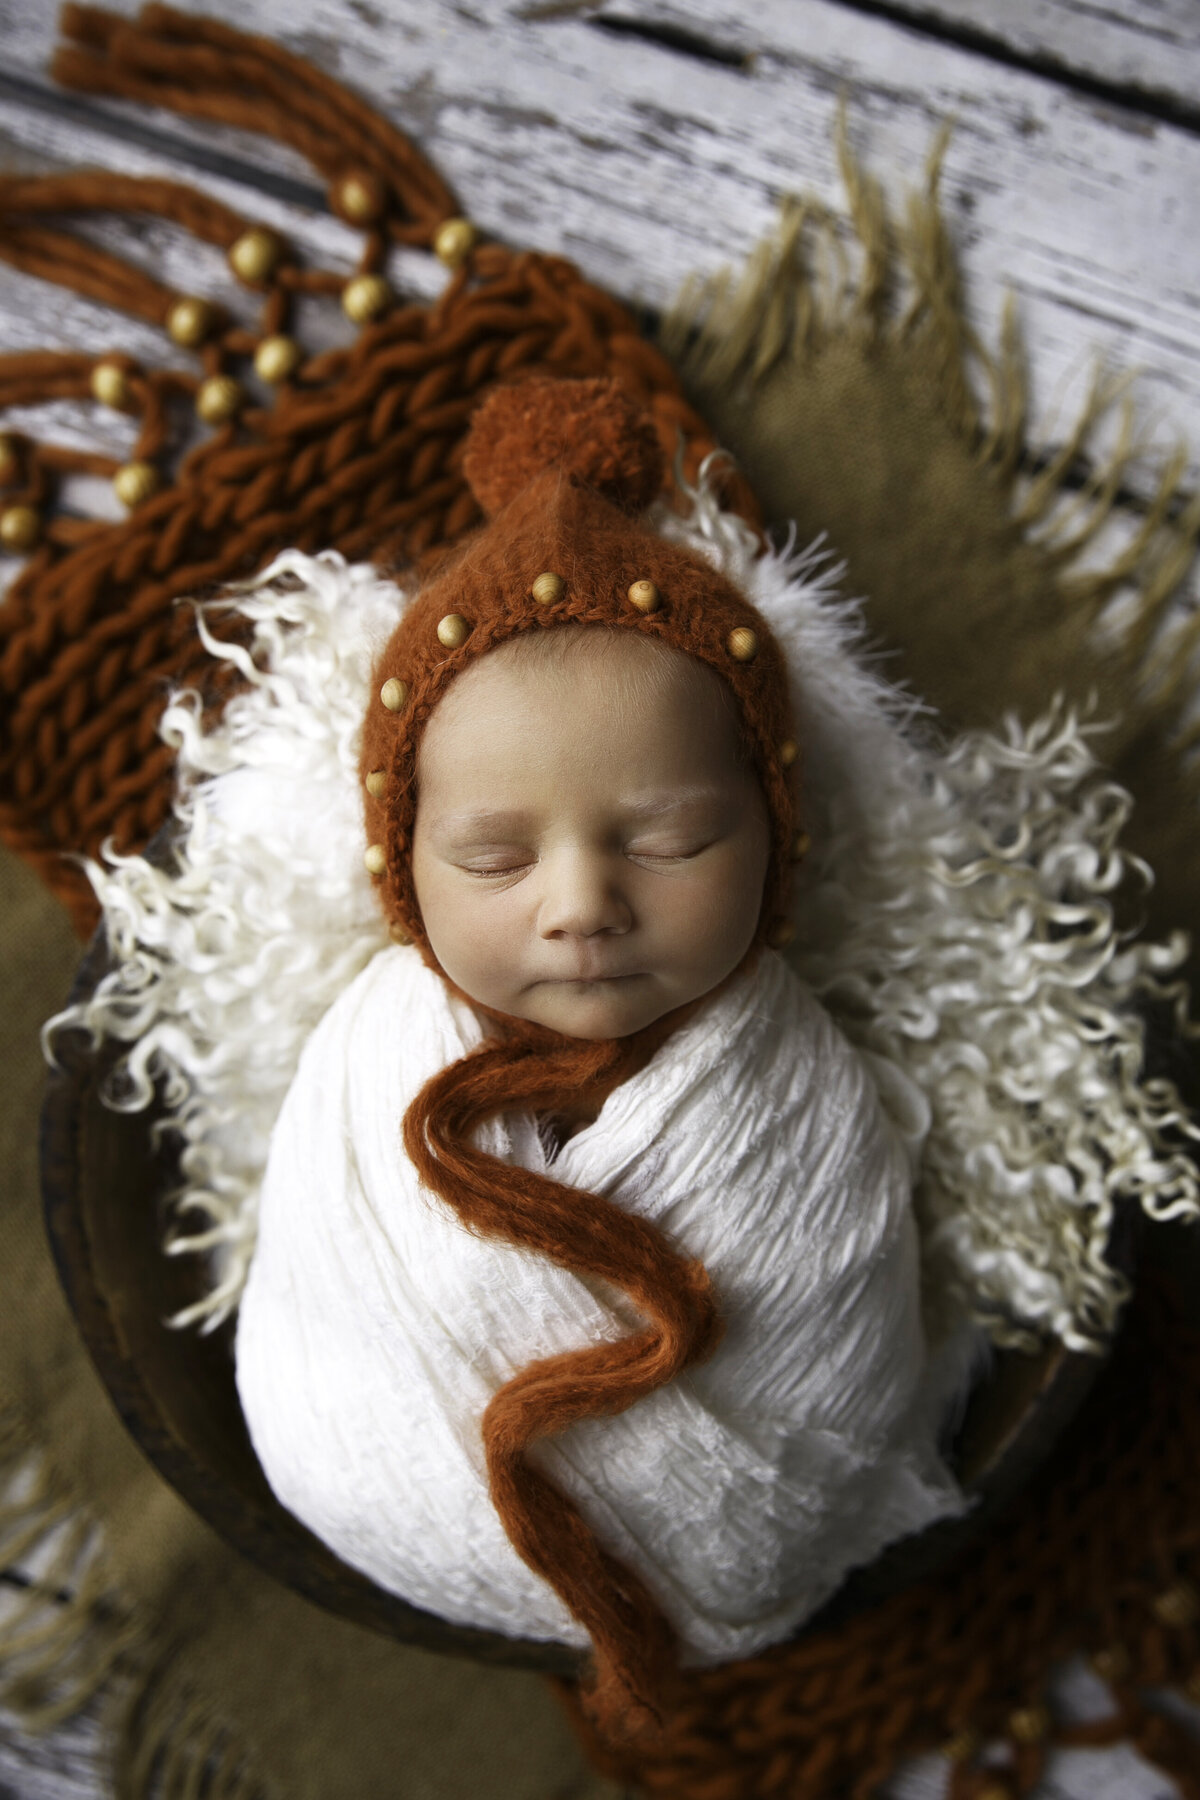 Small newborn baby laying in a basket with an orange colored cap and orange knit scarf underneathe him